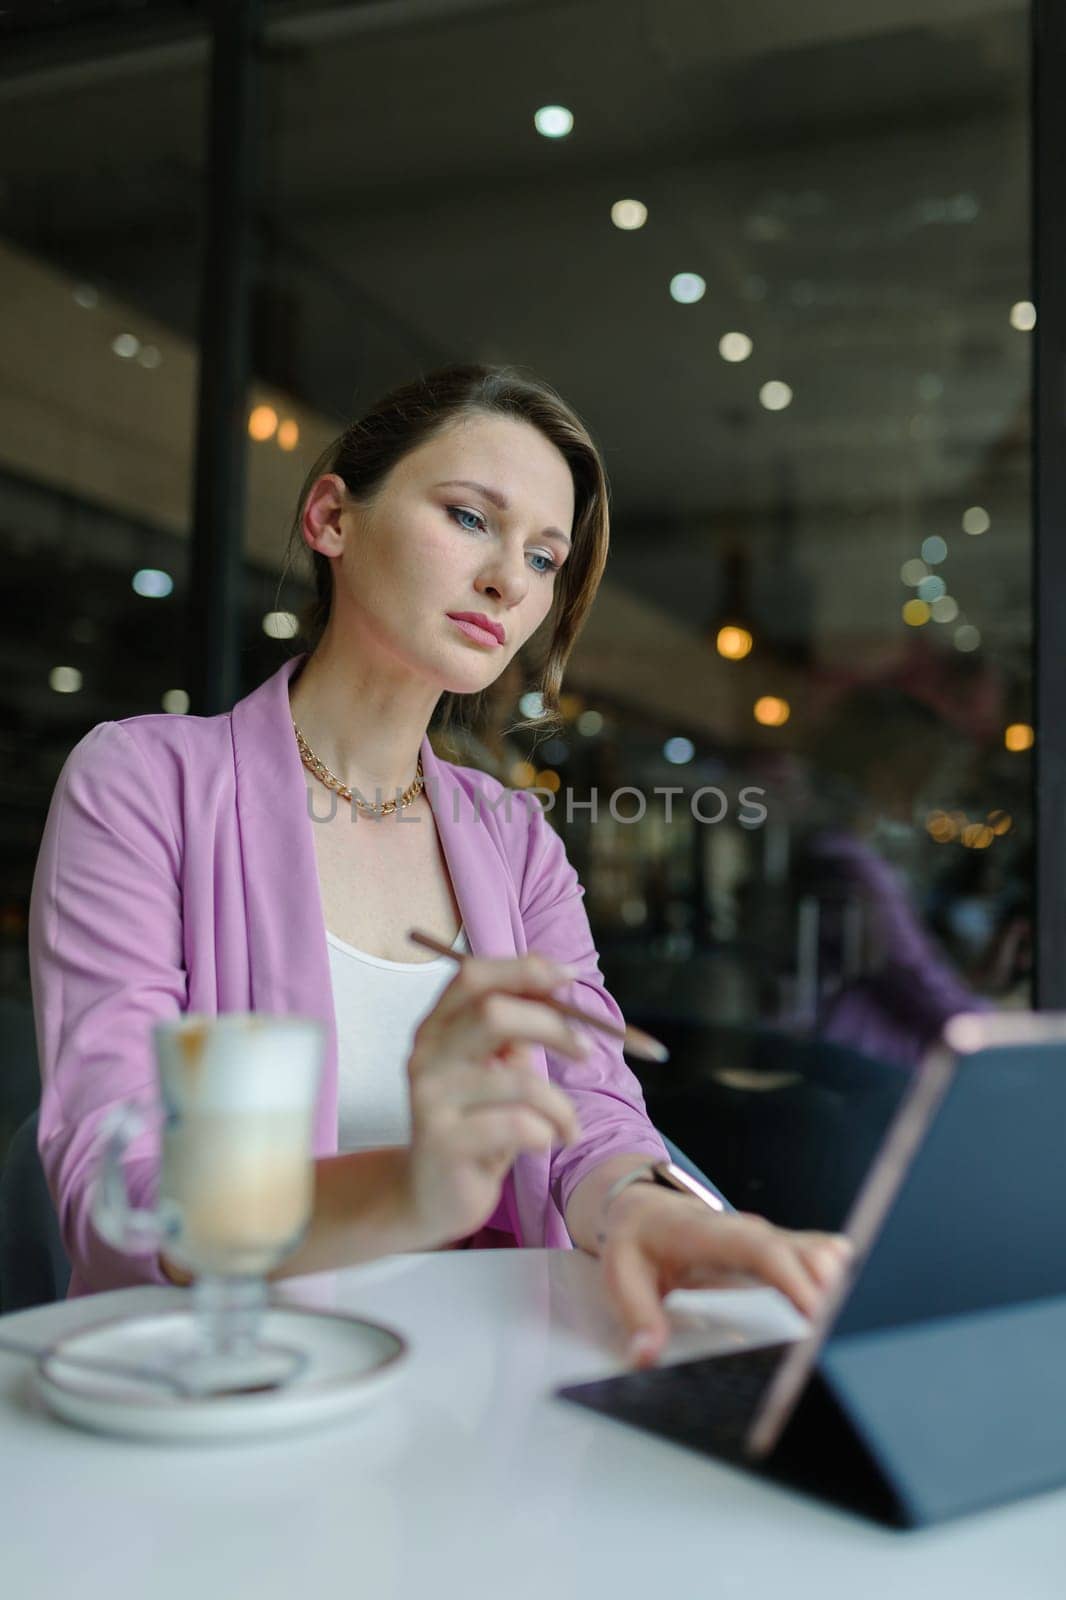 Stylus from a tablet in a woman's hand in front of a tablet on a table in cafe, copy space, vertical.